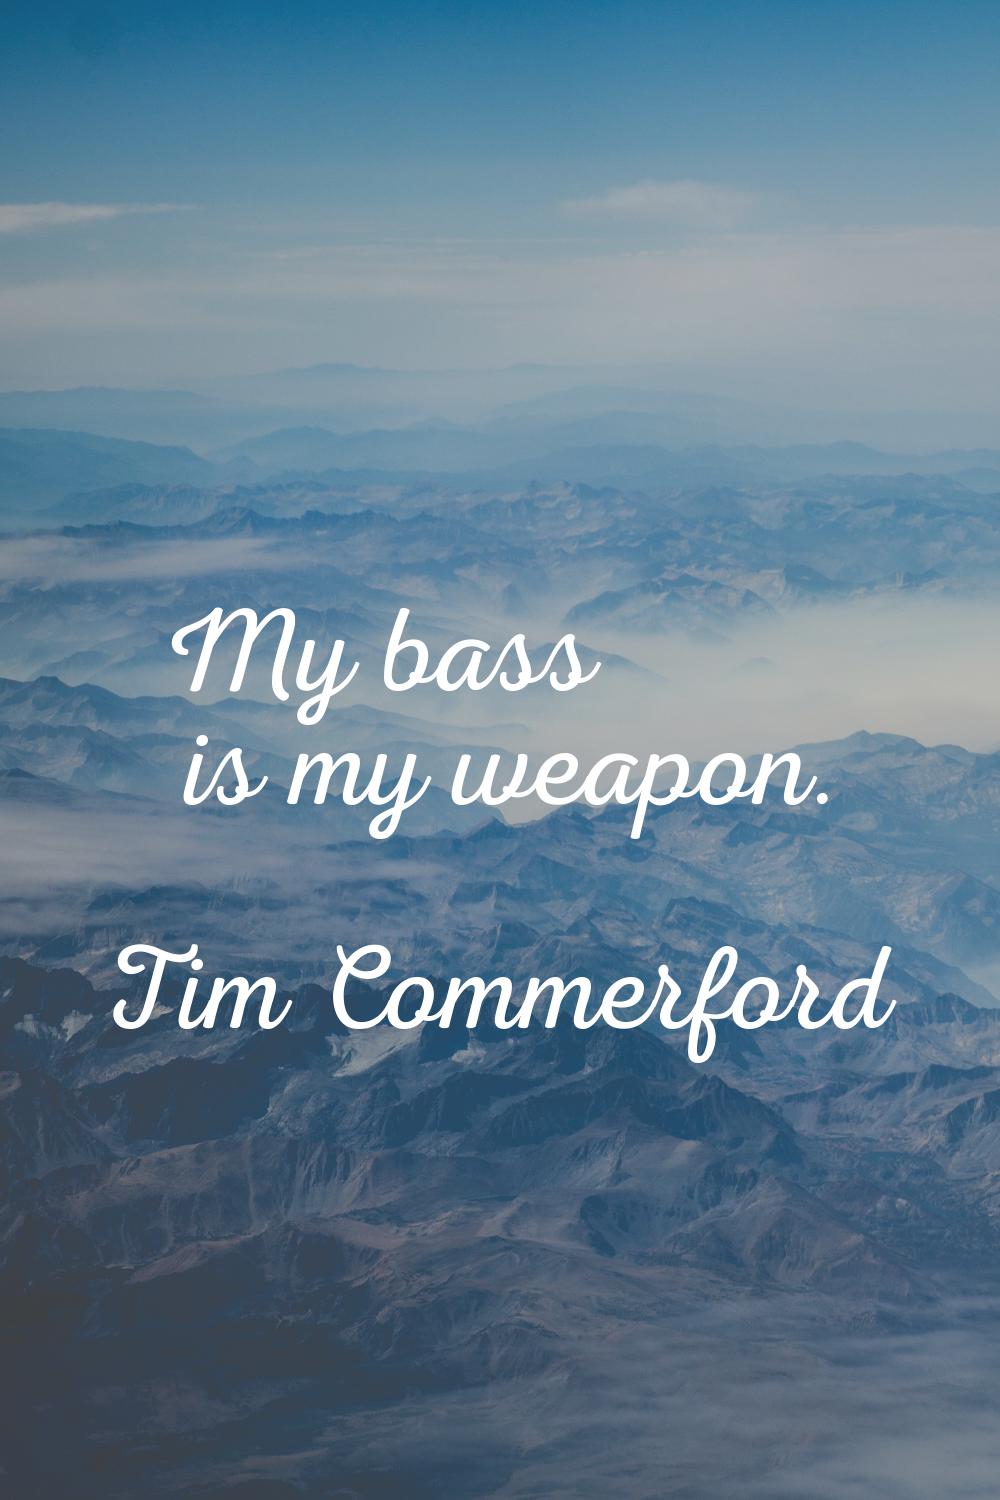 My bass is my weapon.